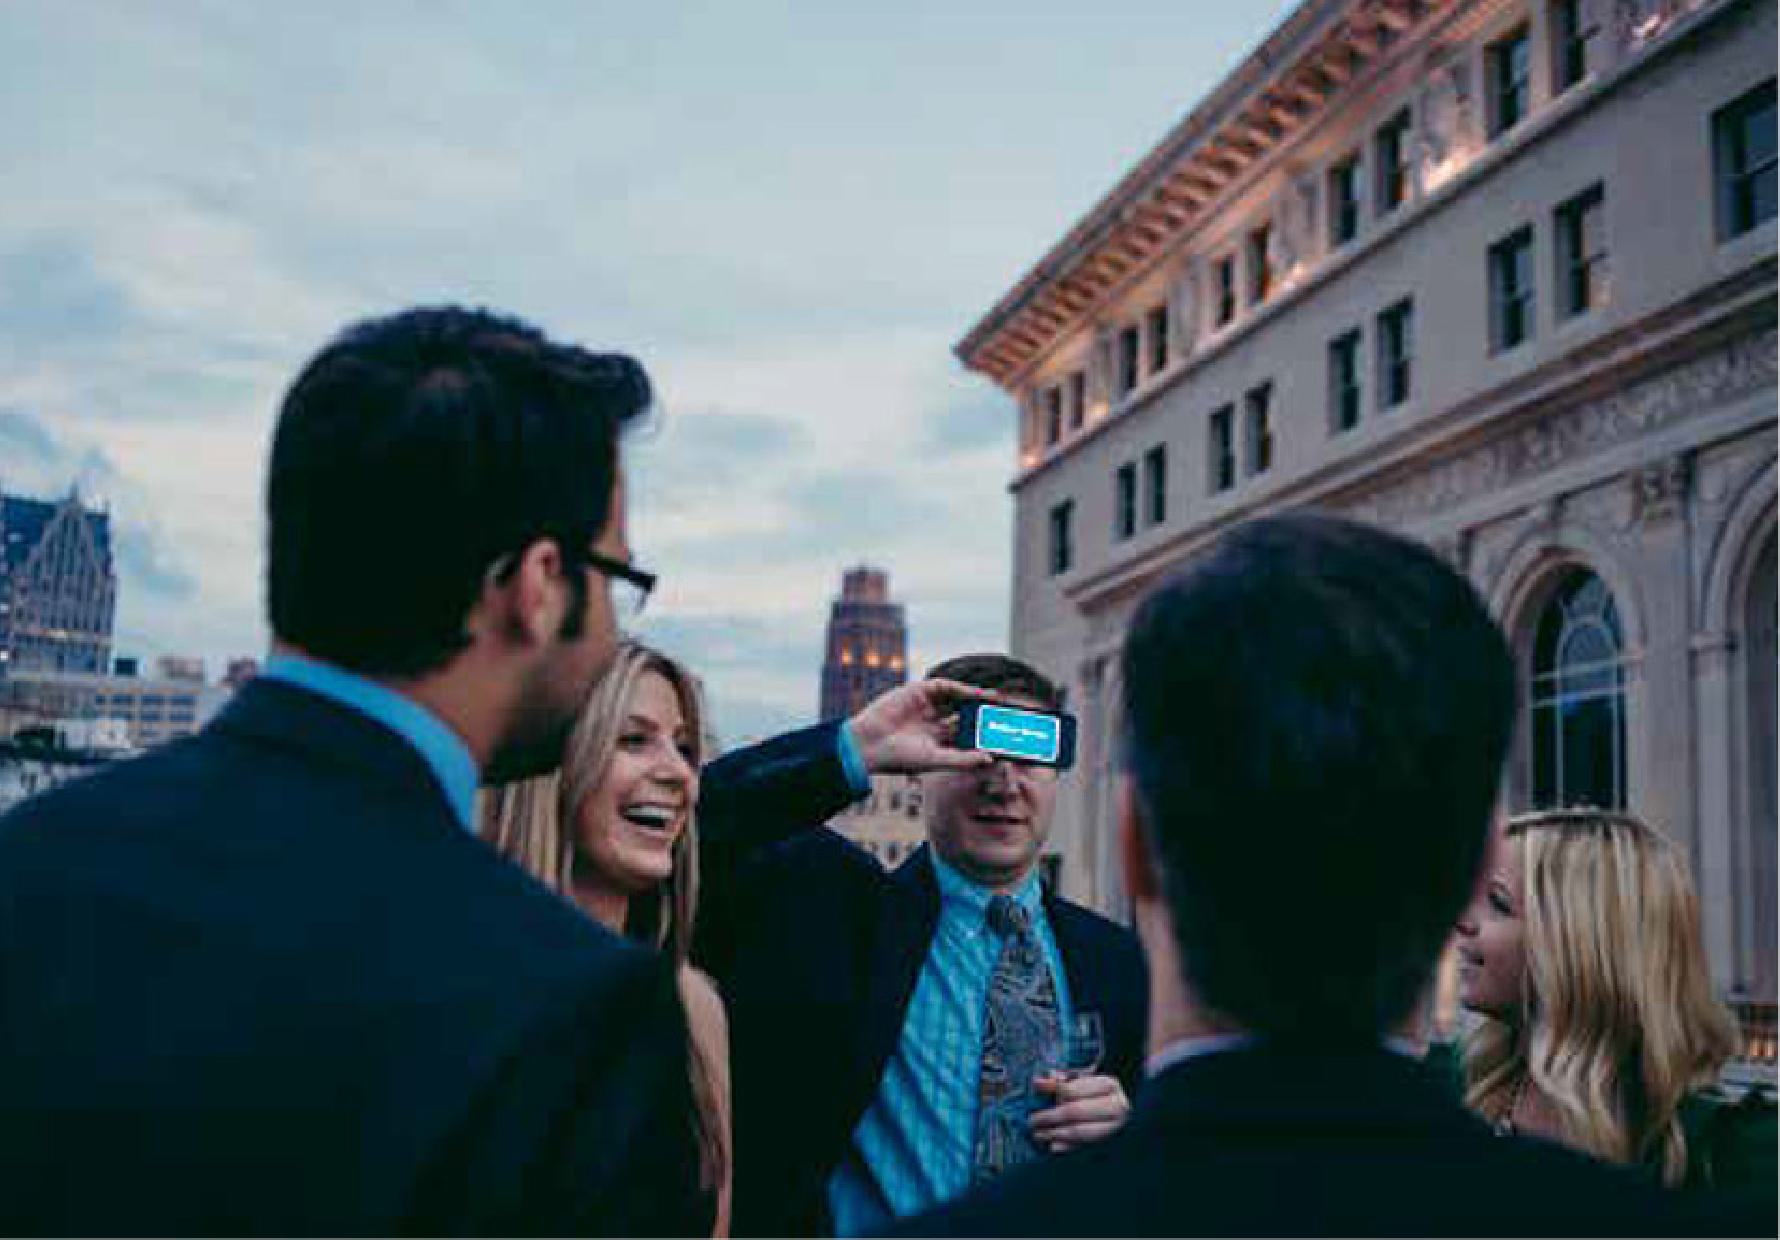 Members mingling at a rooftop event.